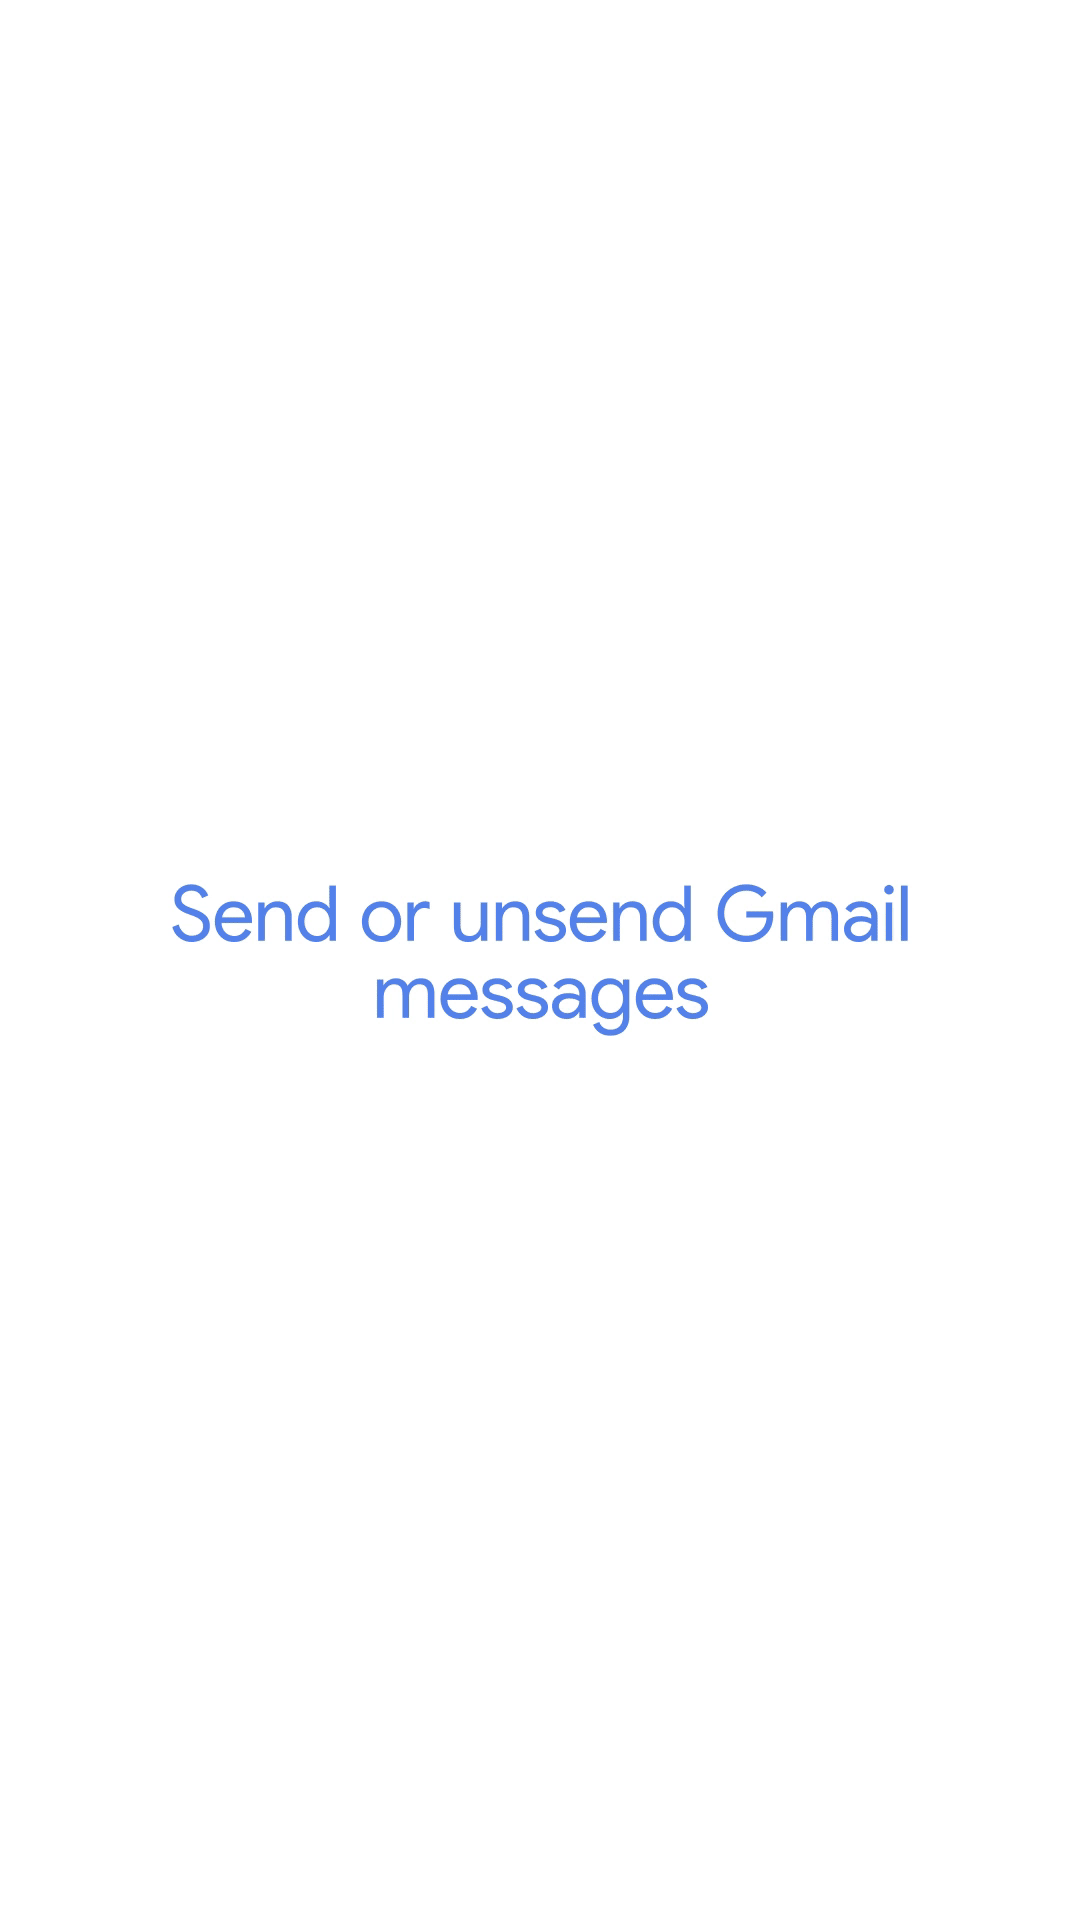 An animation showing how to send and unsend a message in Gmail on iOS